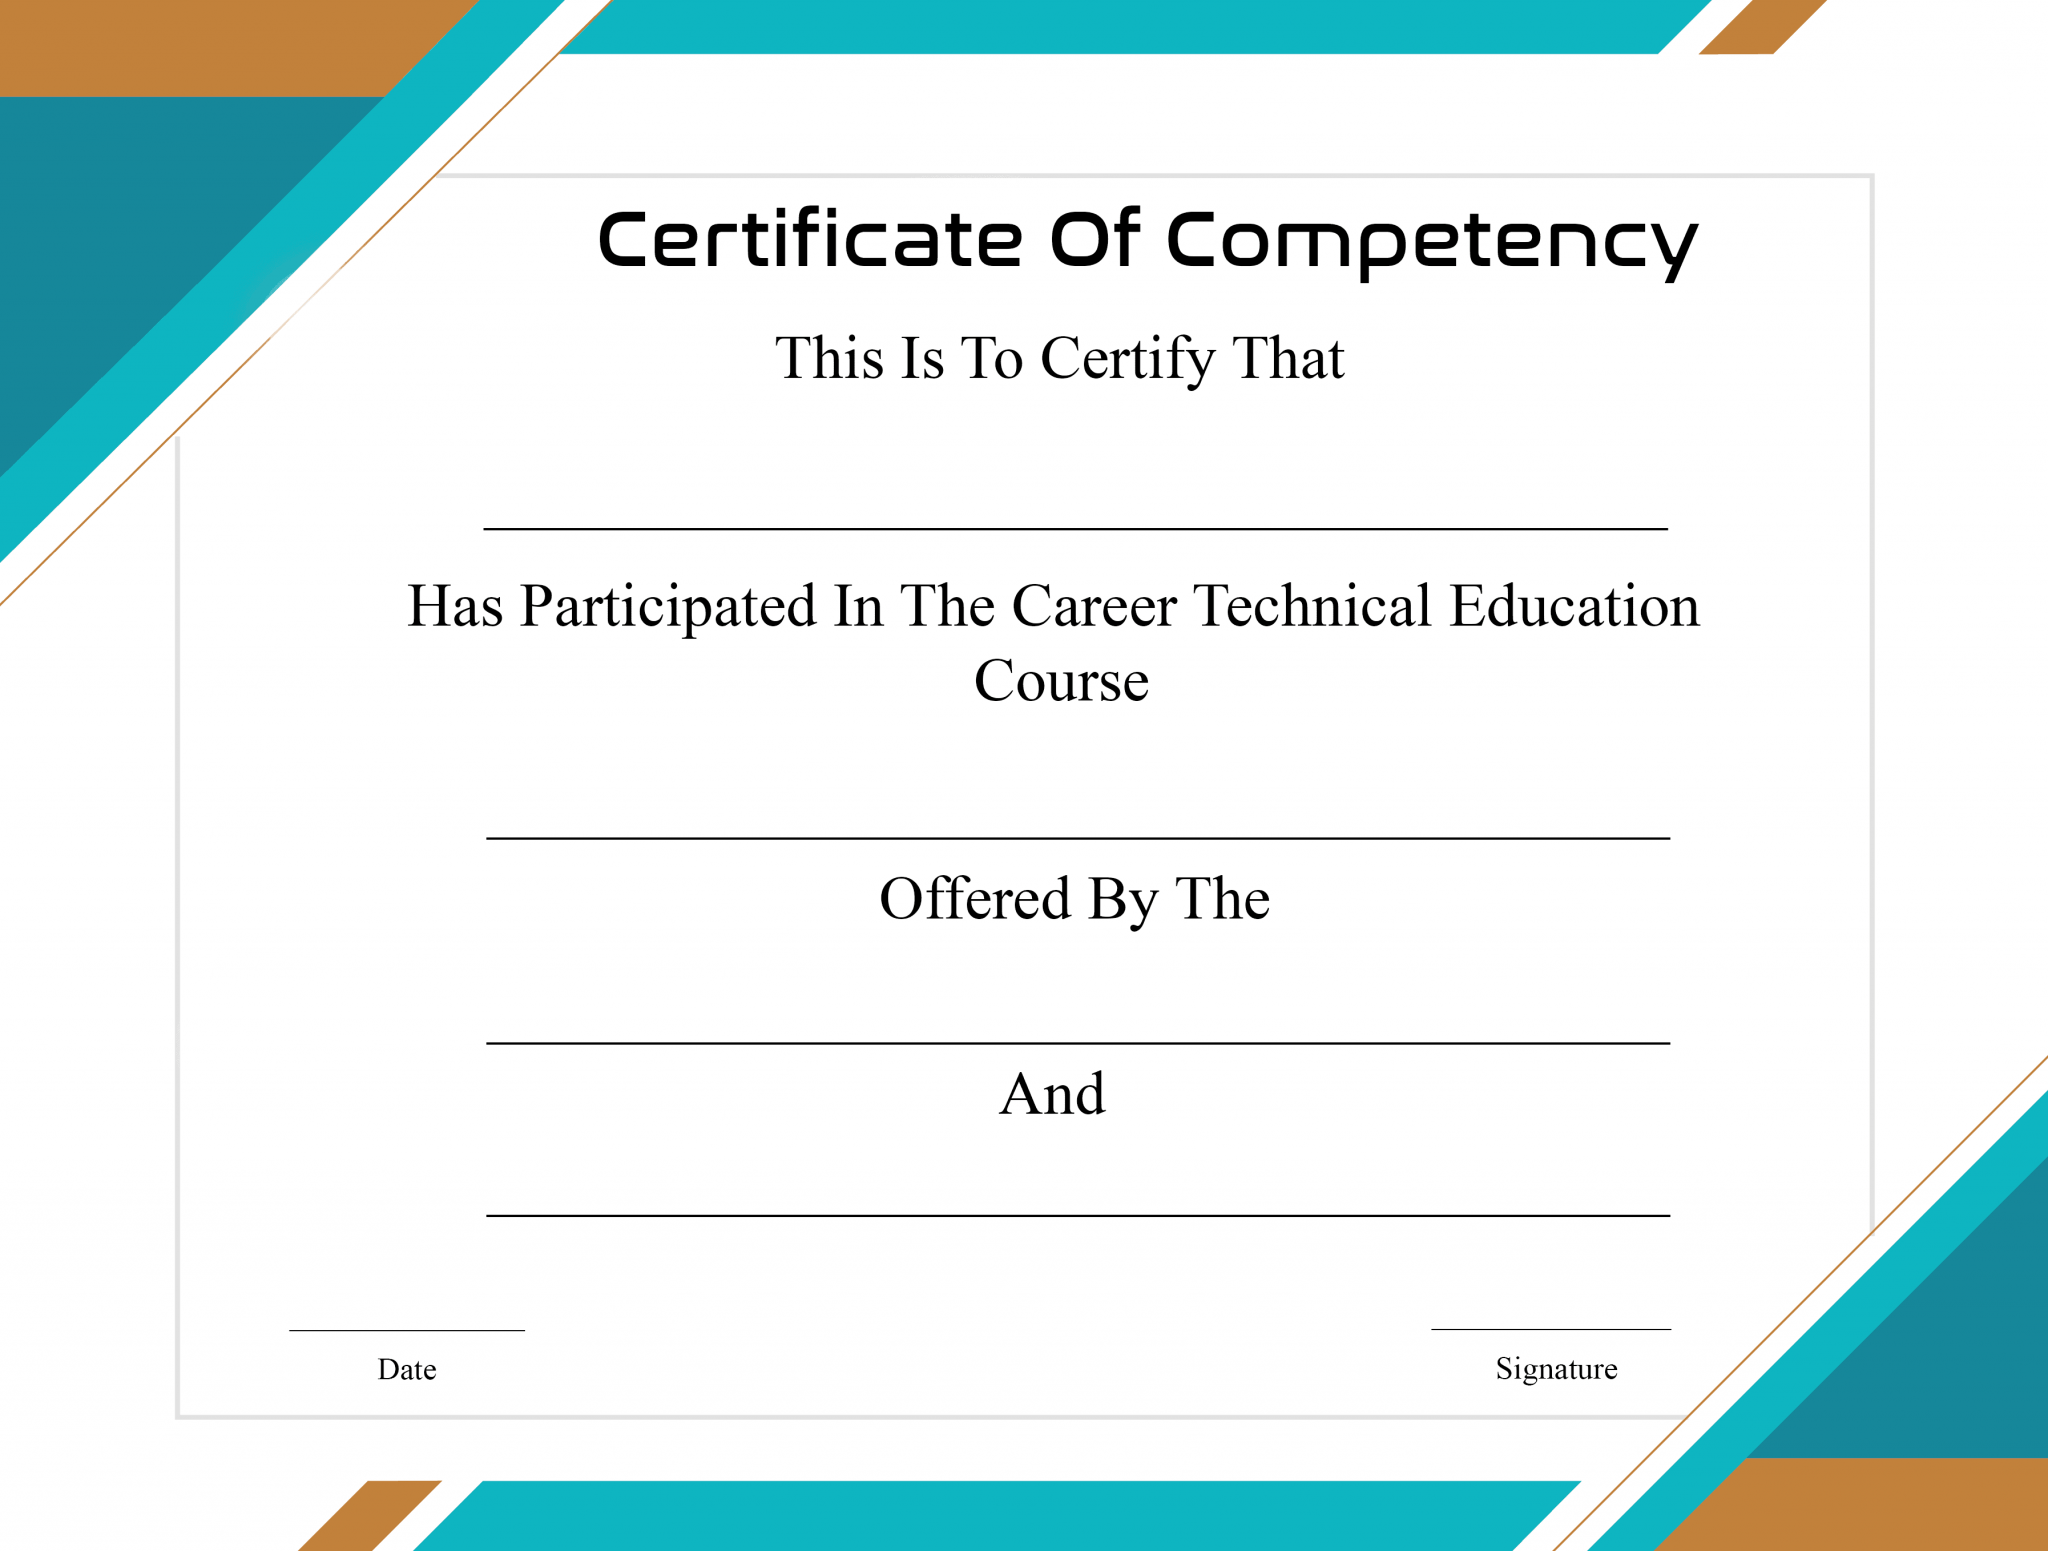 Government Certificate of Competency Templates & Samples HowToWiki